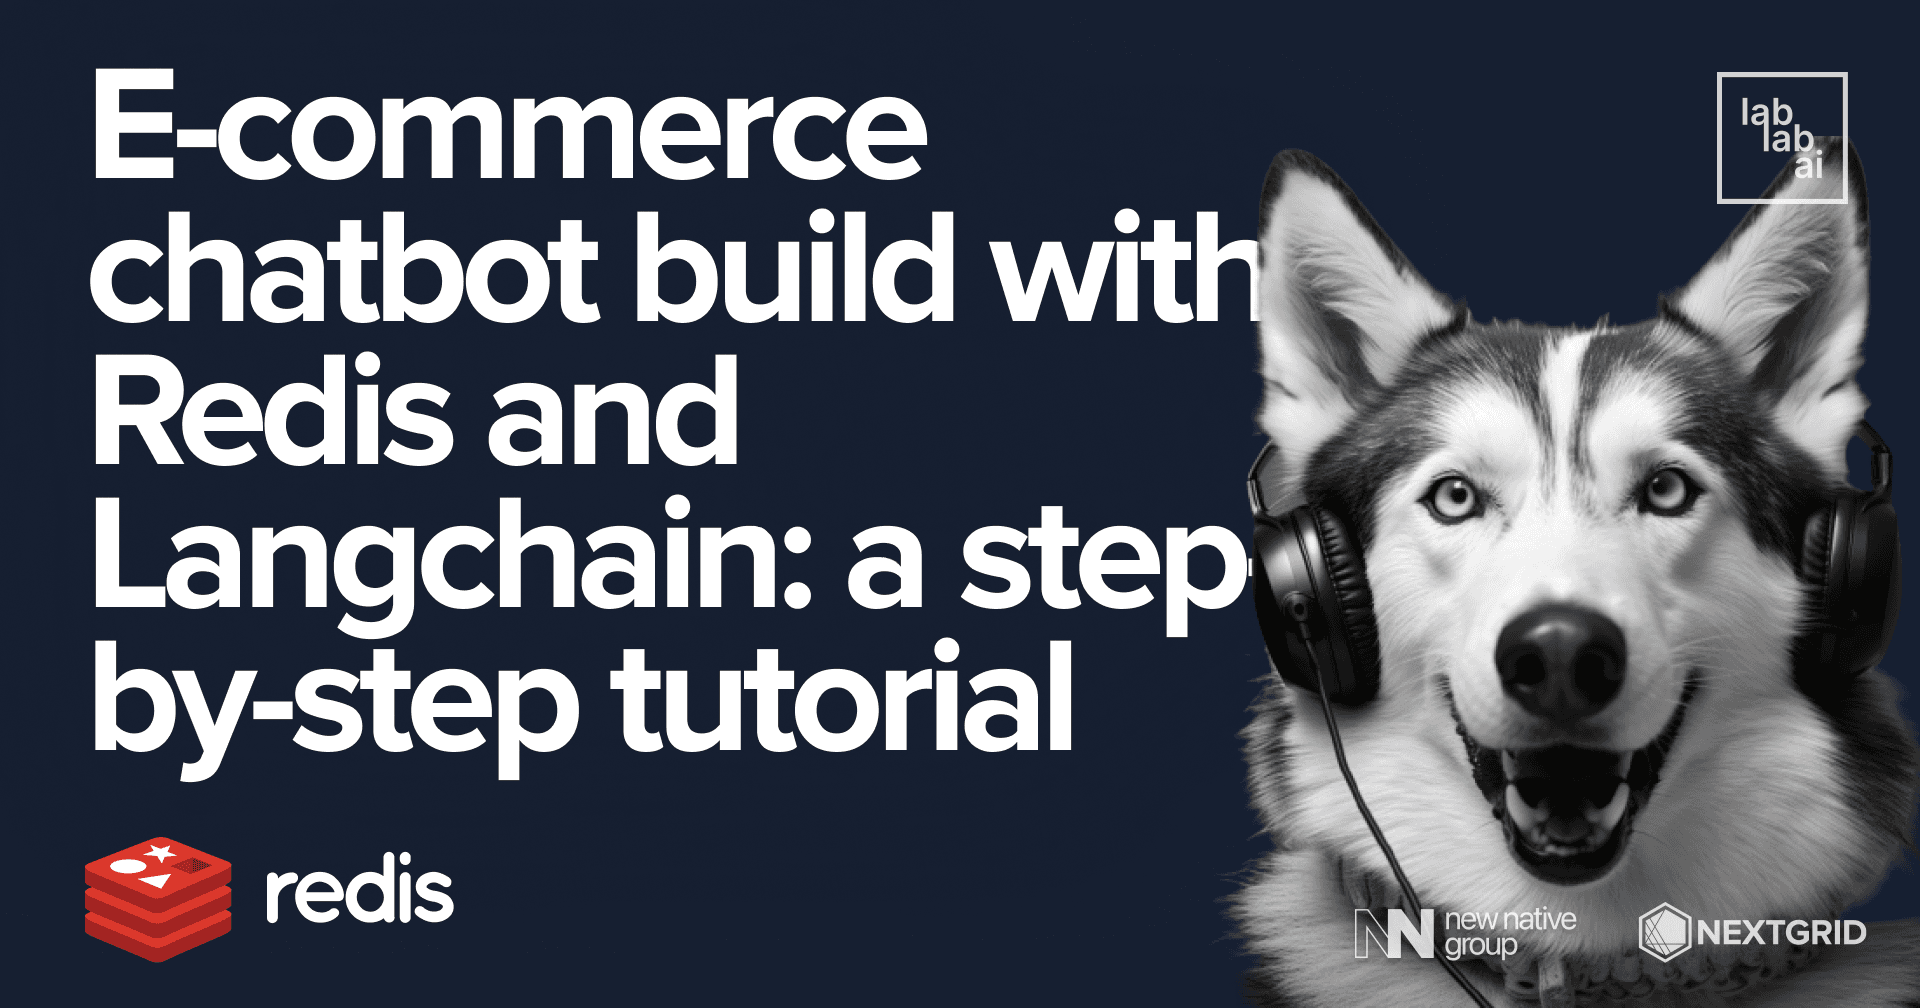 E-commerce chatbot build with Redis, Langchain and ChatGPT: a step-by-step tutorial